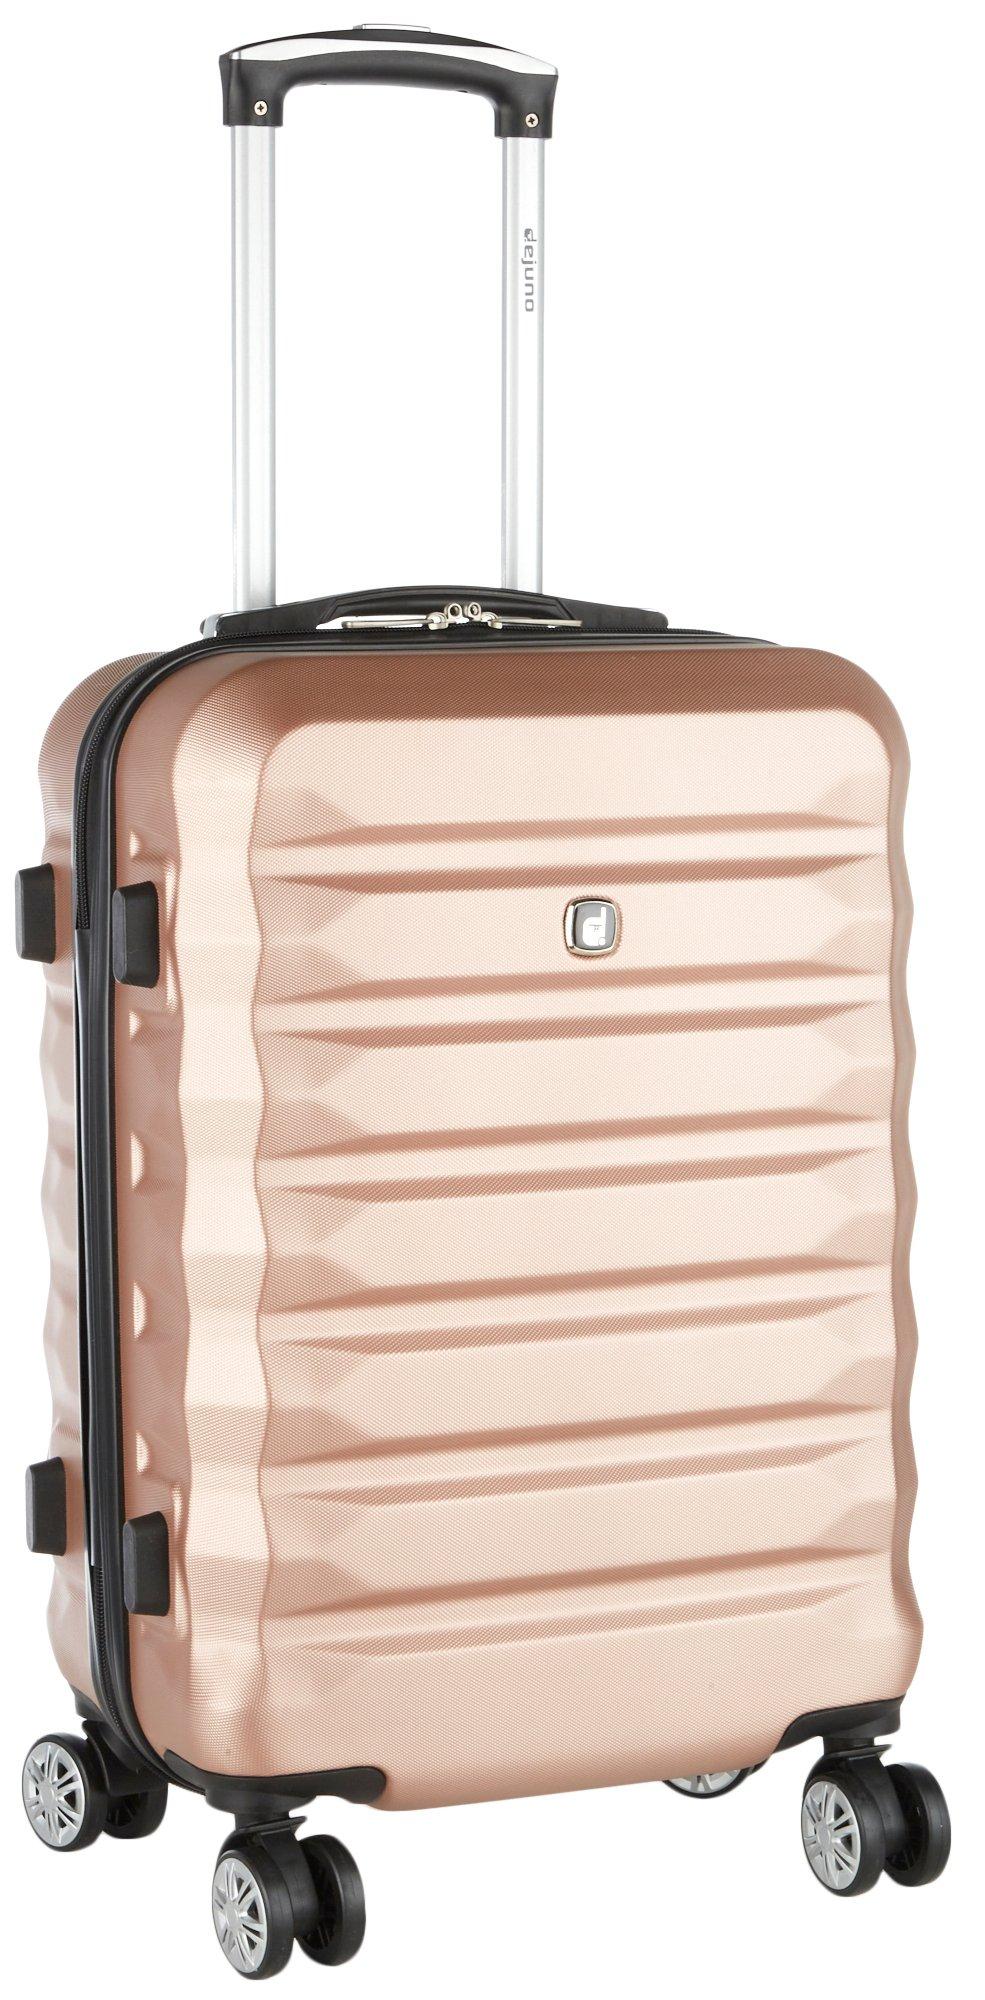 20'' Frontier Hardside Spinner Luggage